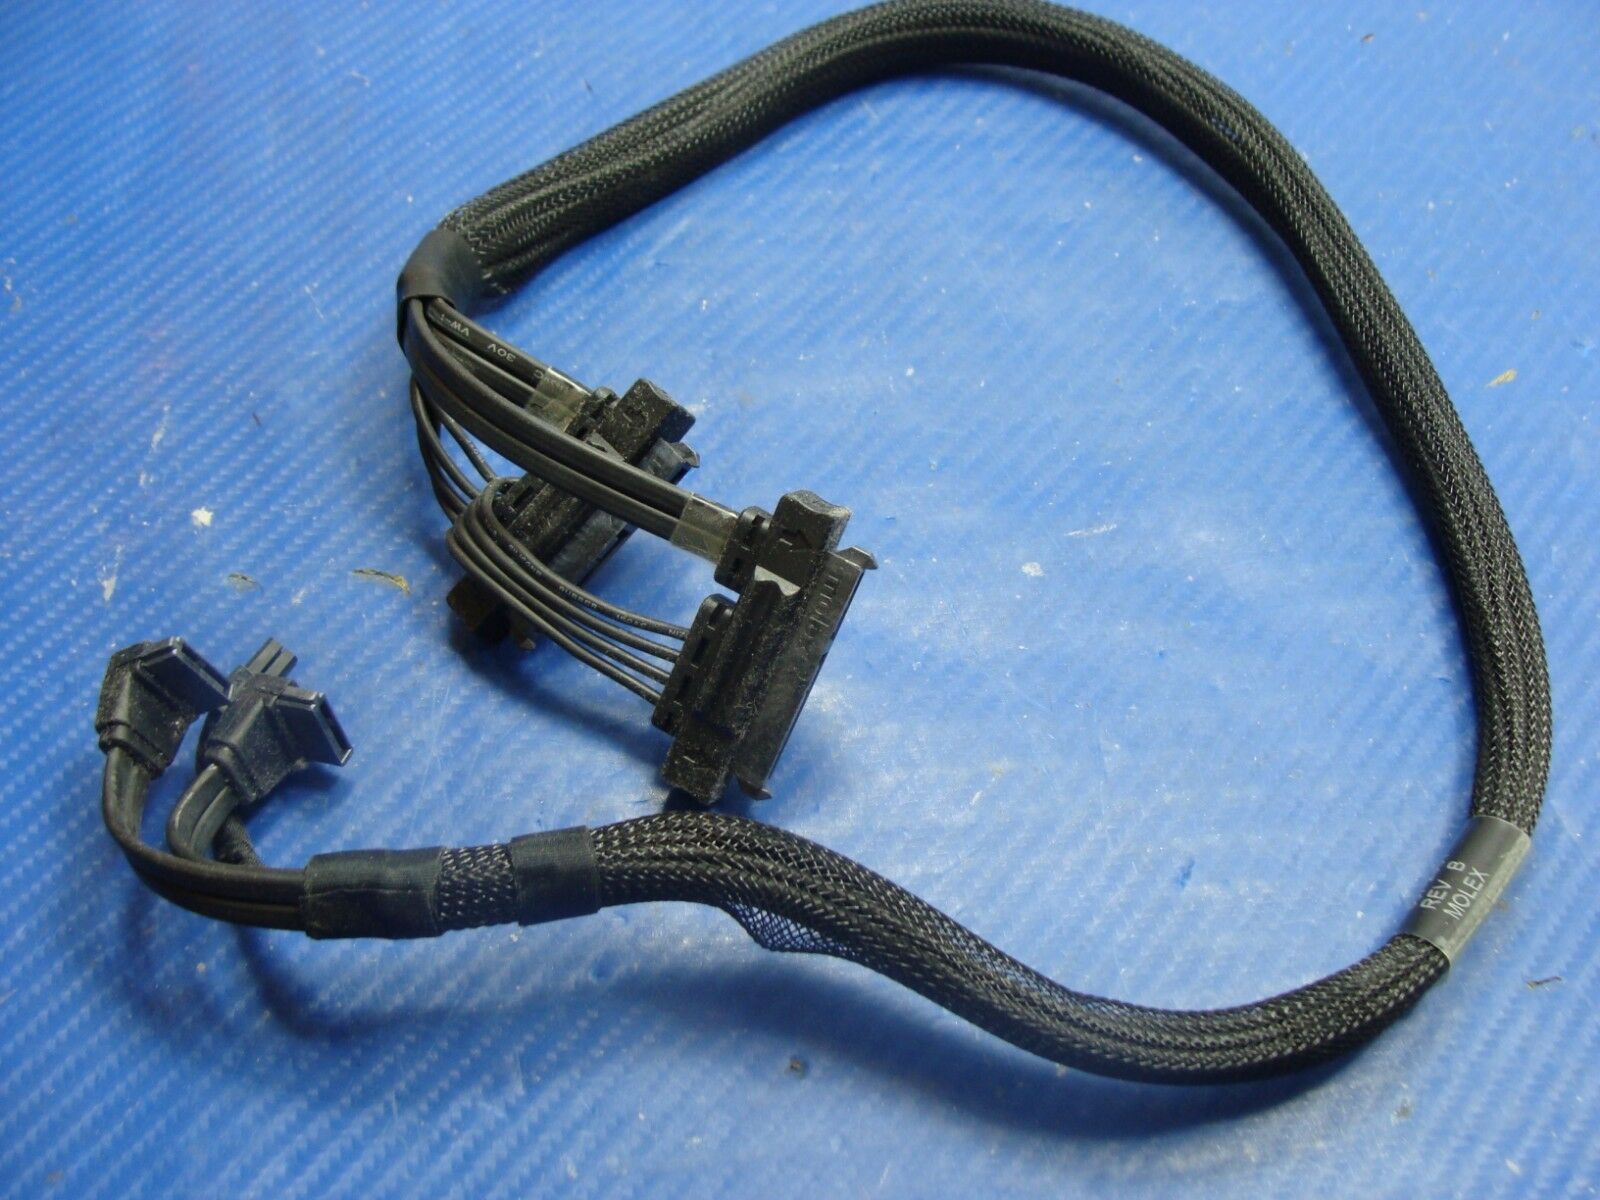 Apple Mac Pro A1289 Early 2009 MB871LL/A Genuine Optical Drive Cable 922-8891 Apple